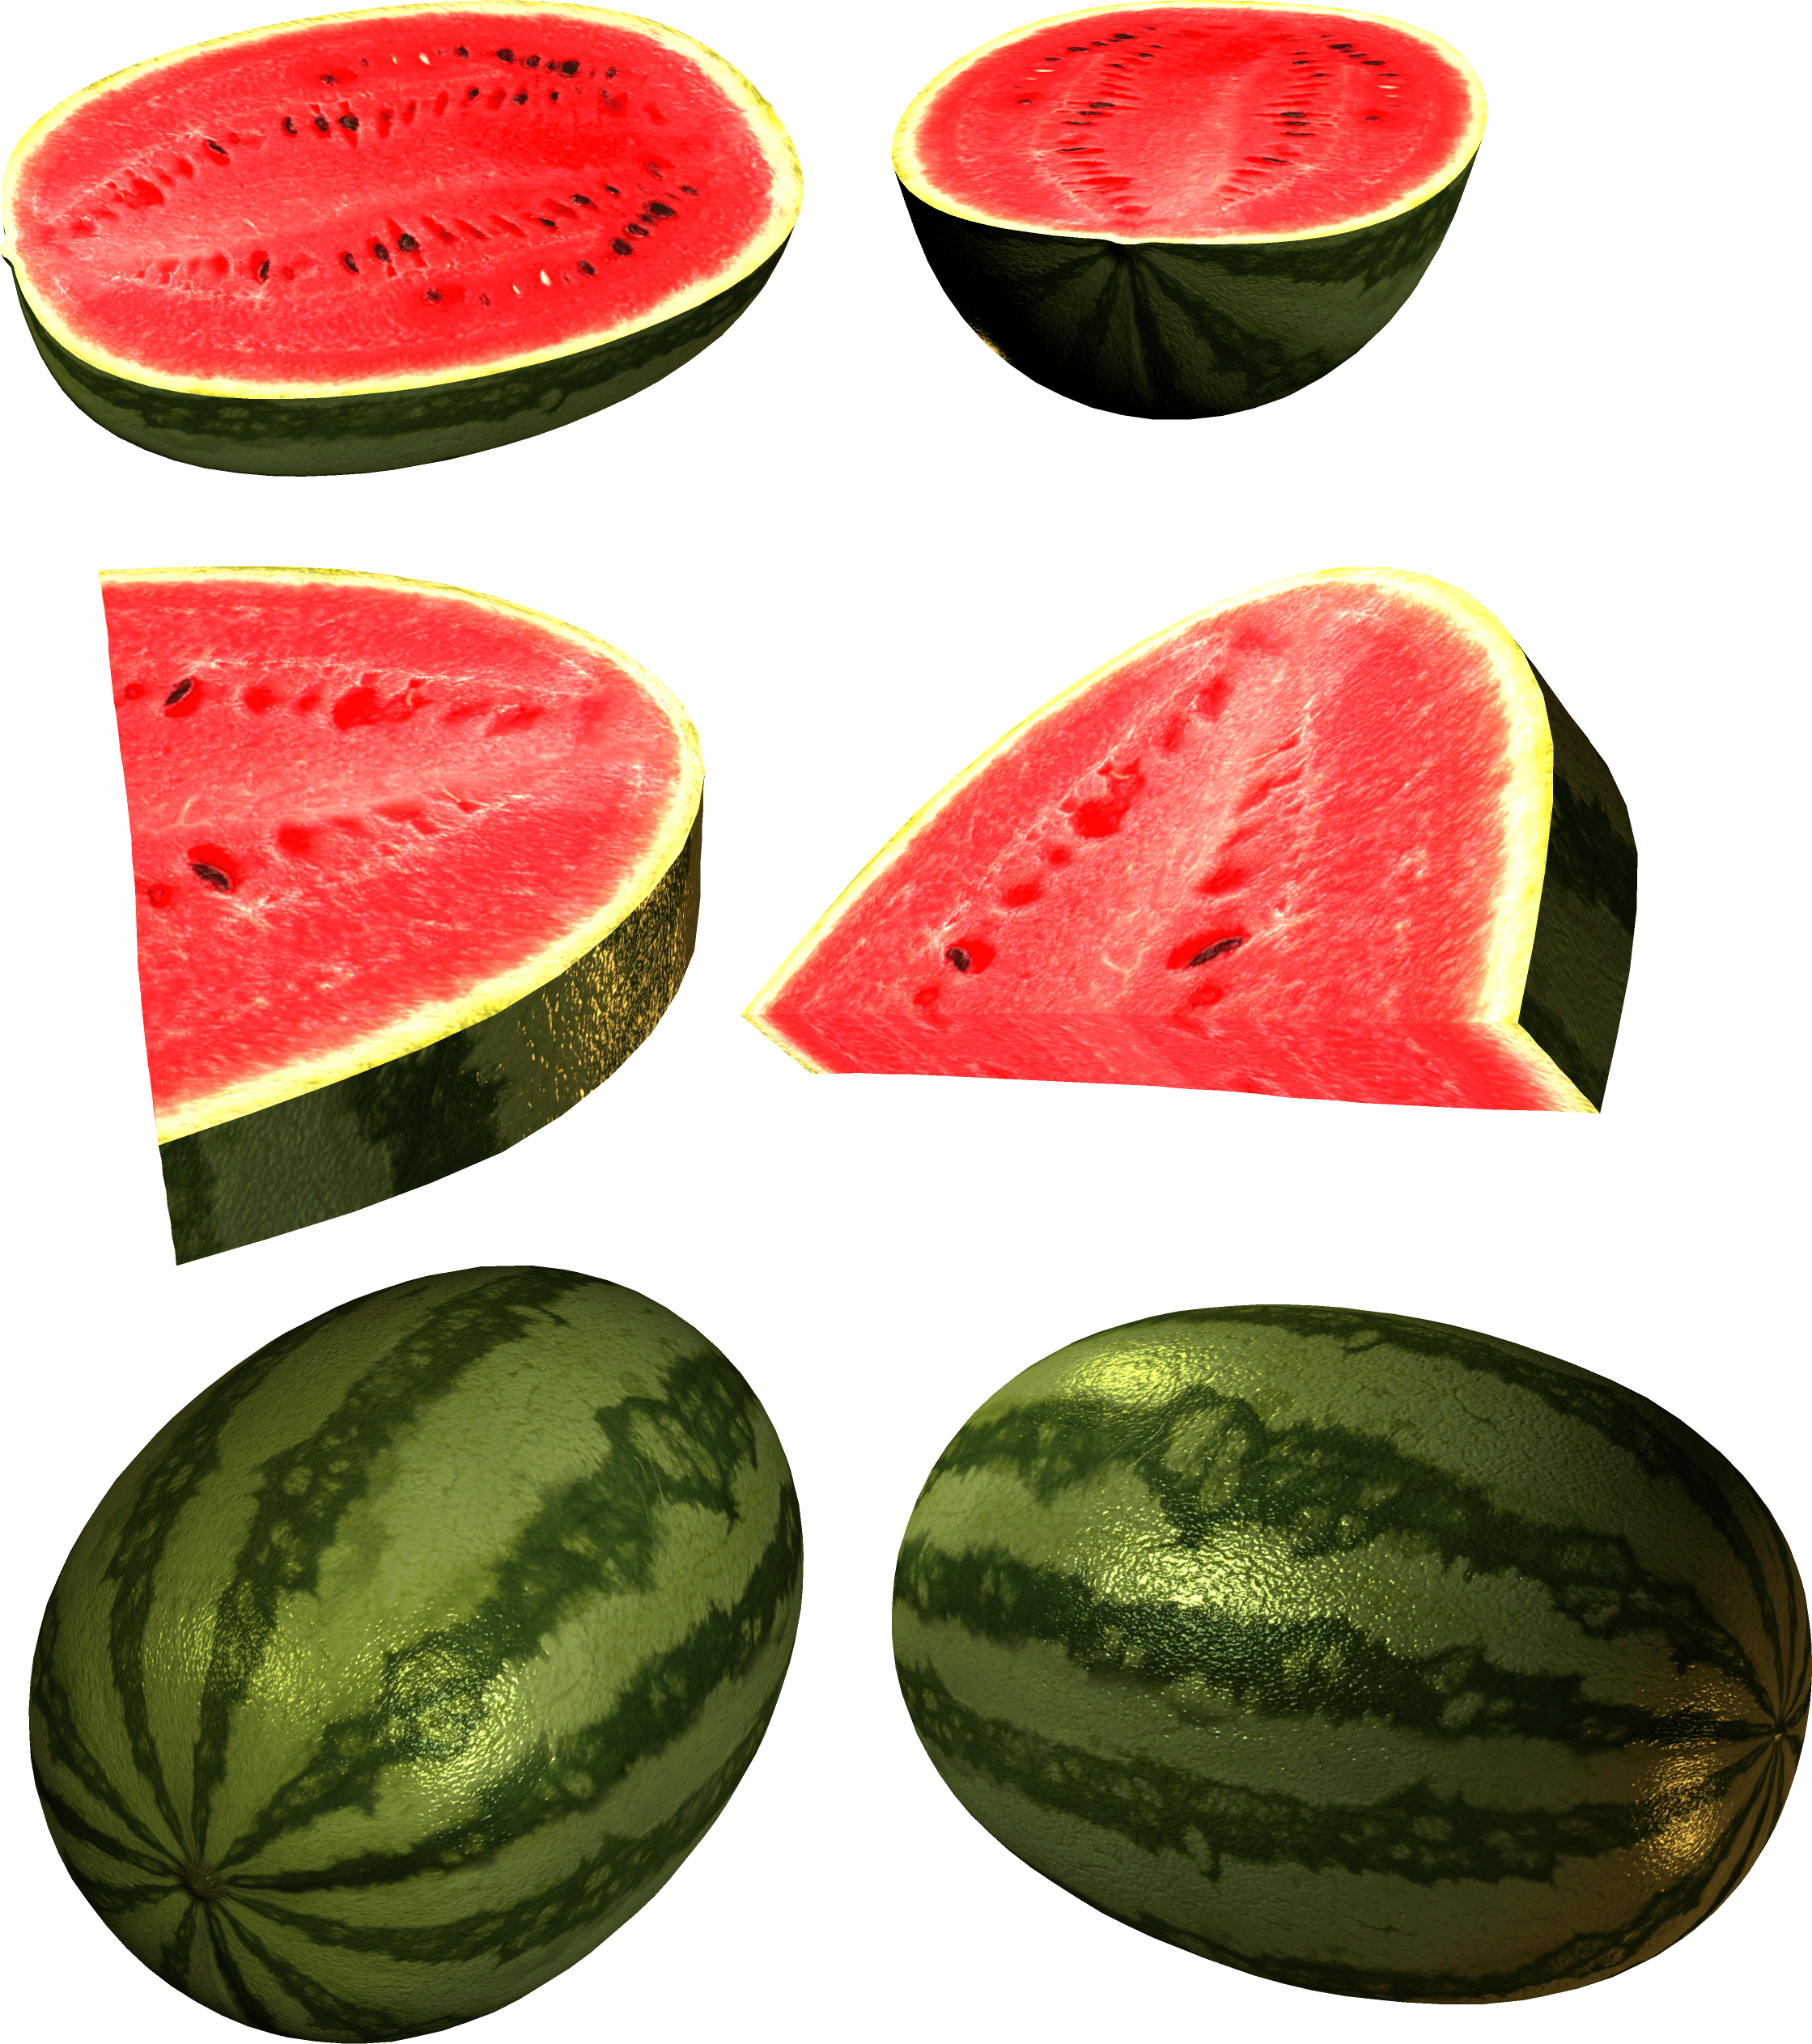 Watermelon Png Image PNG Image